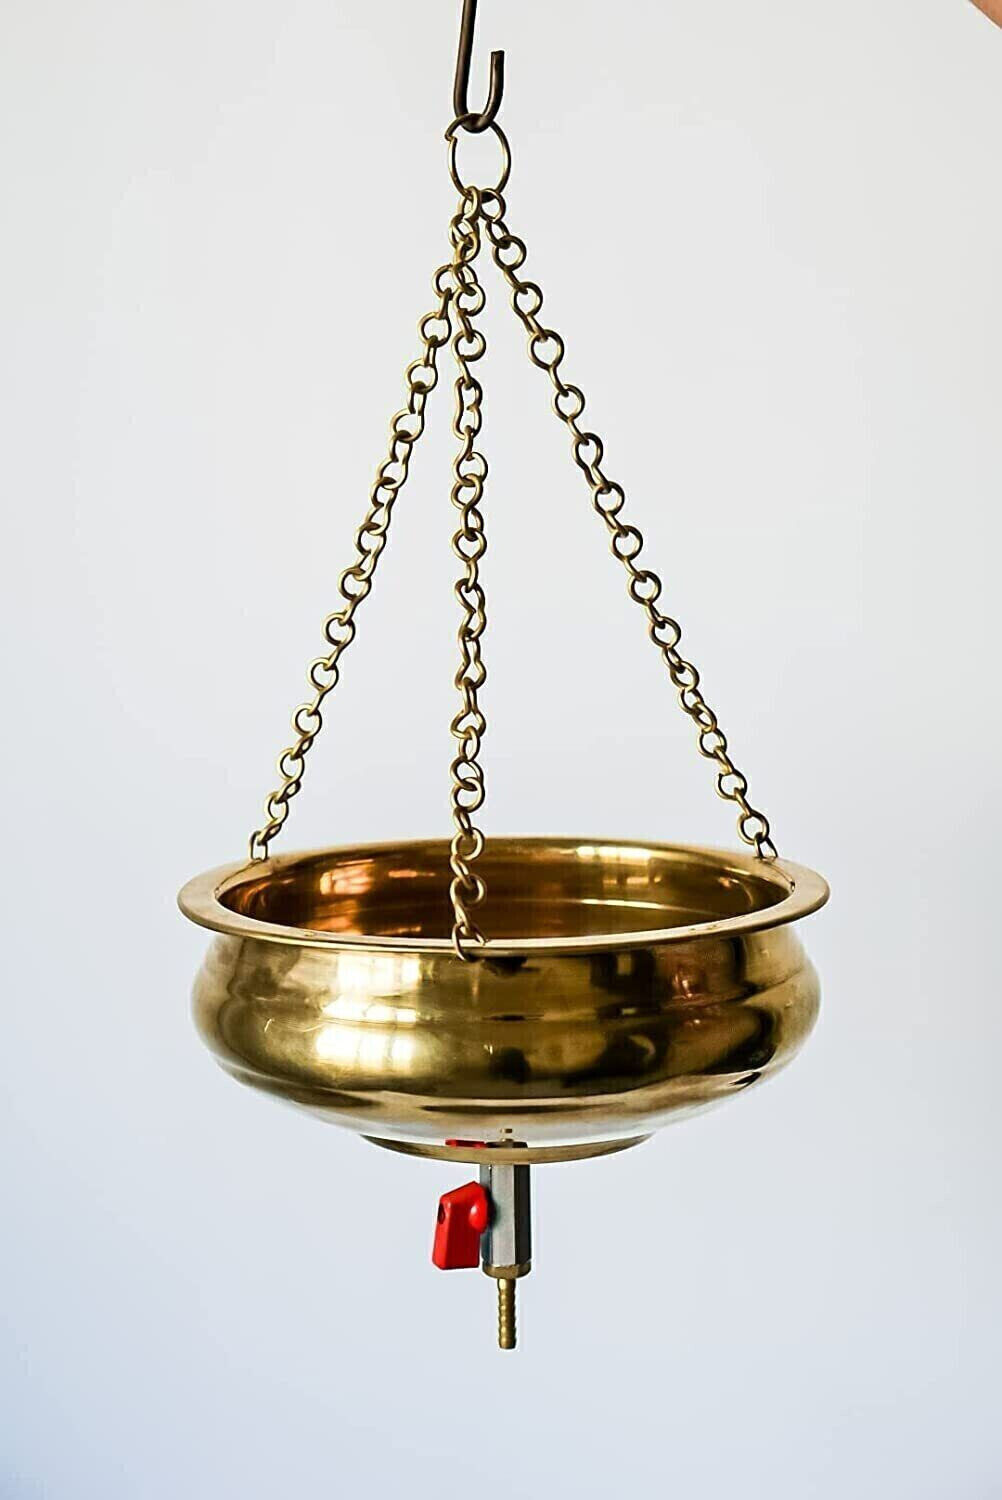 SHIRODHARA POT BRASS (2 LTR) WITH CHAIN, VALVE AND NOZZLE+